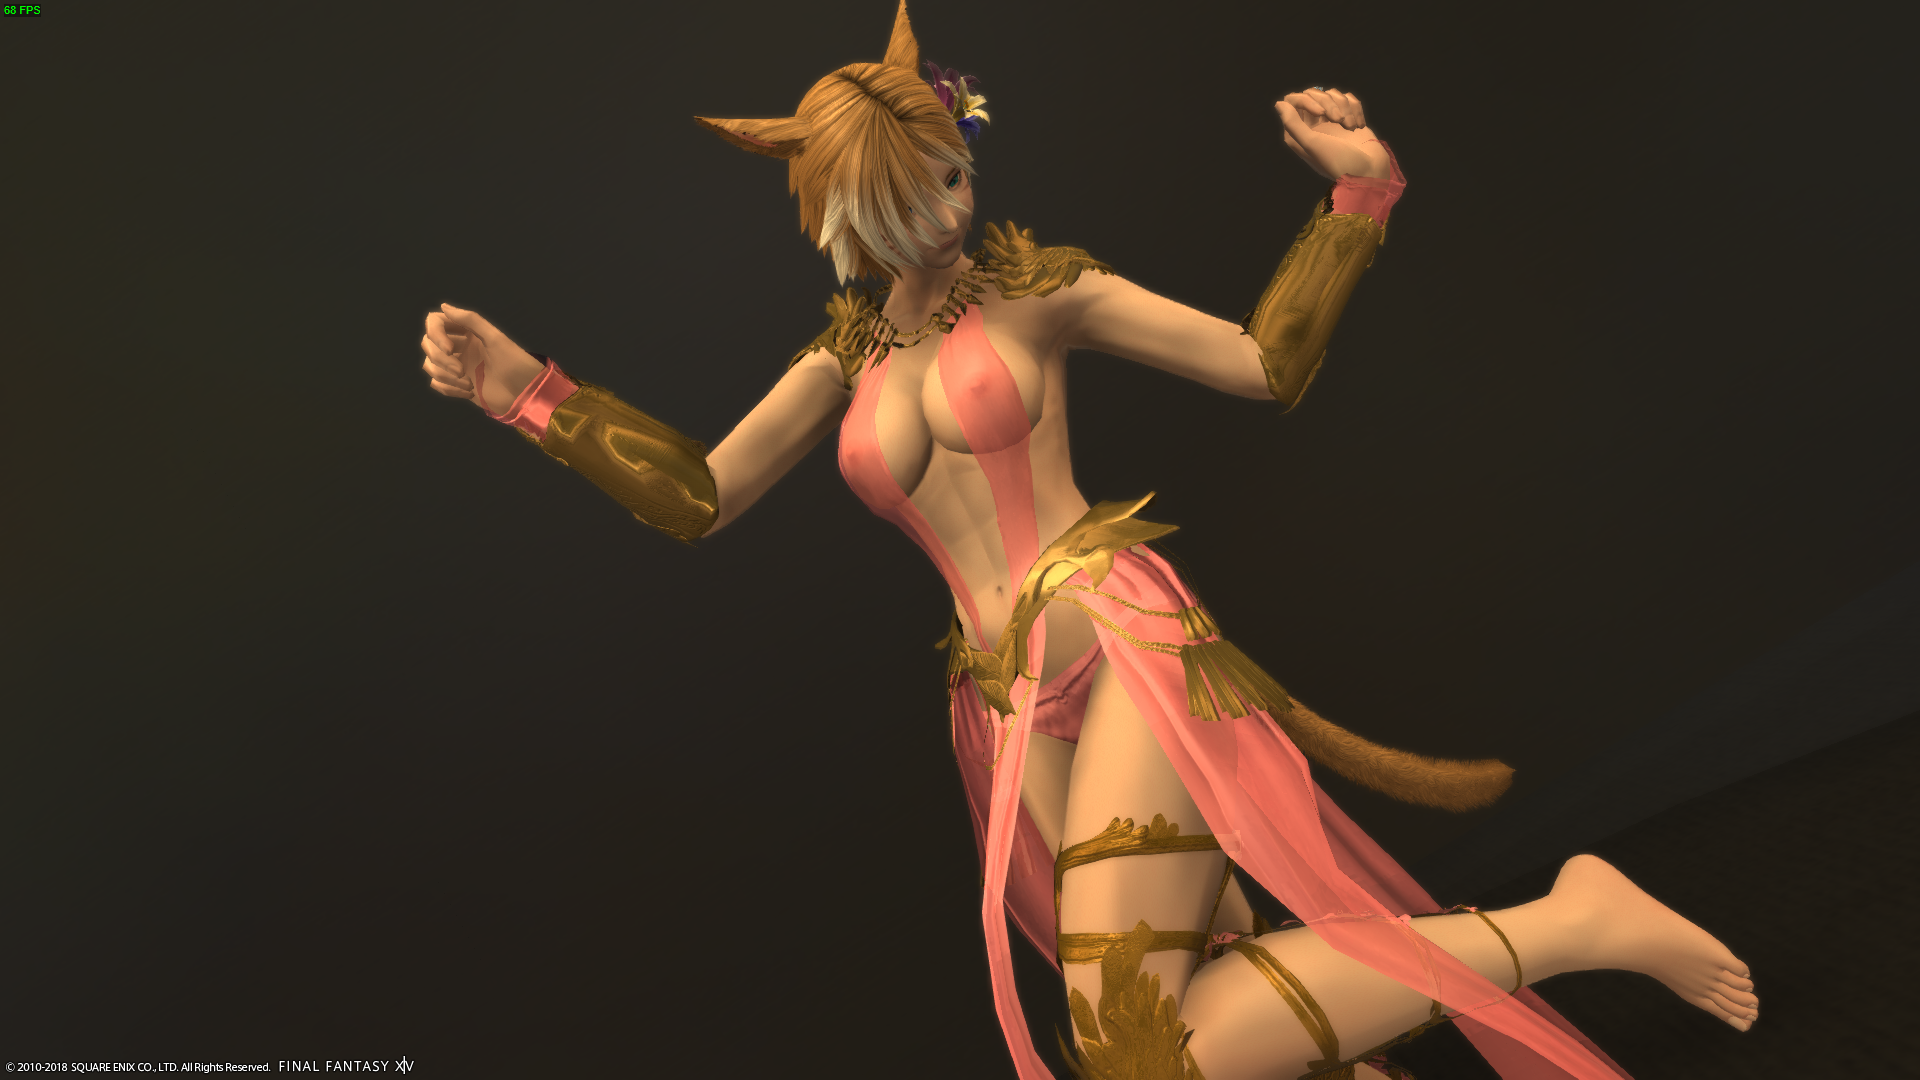 anne m klein recommends ff 14 nude mod pic